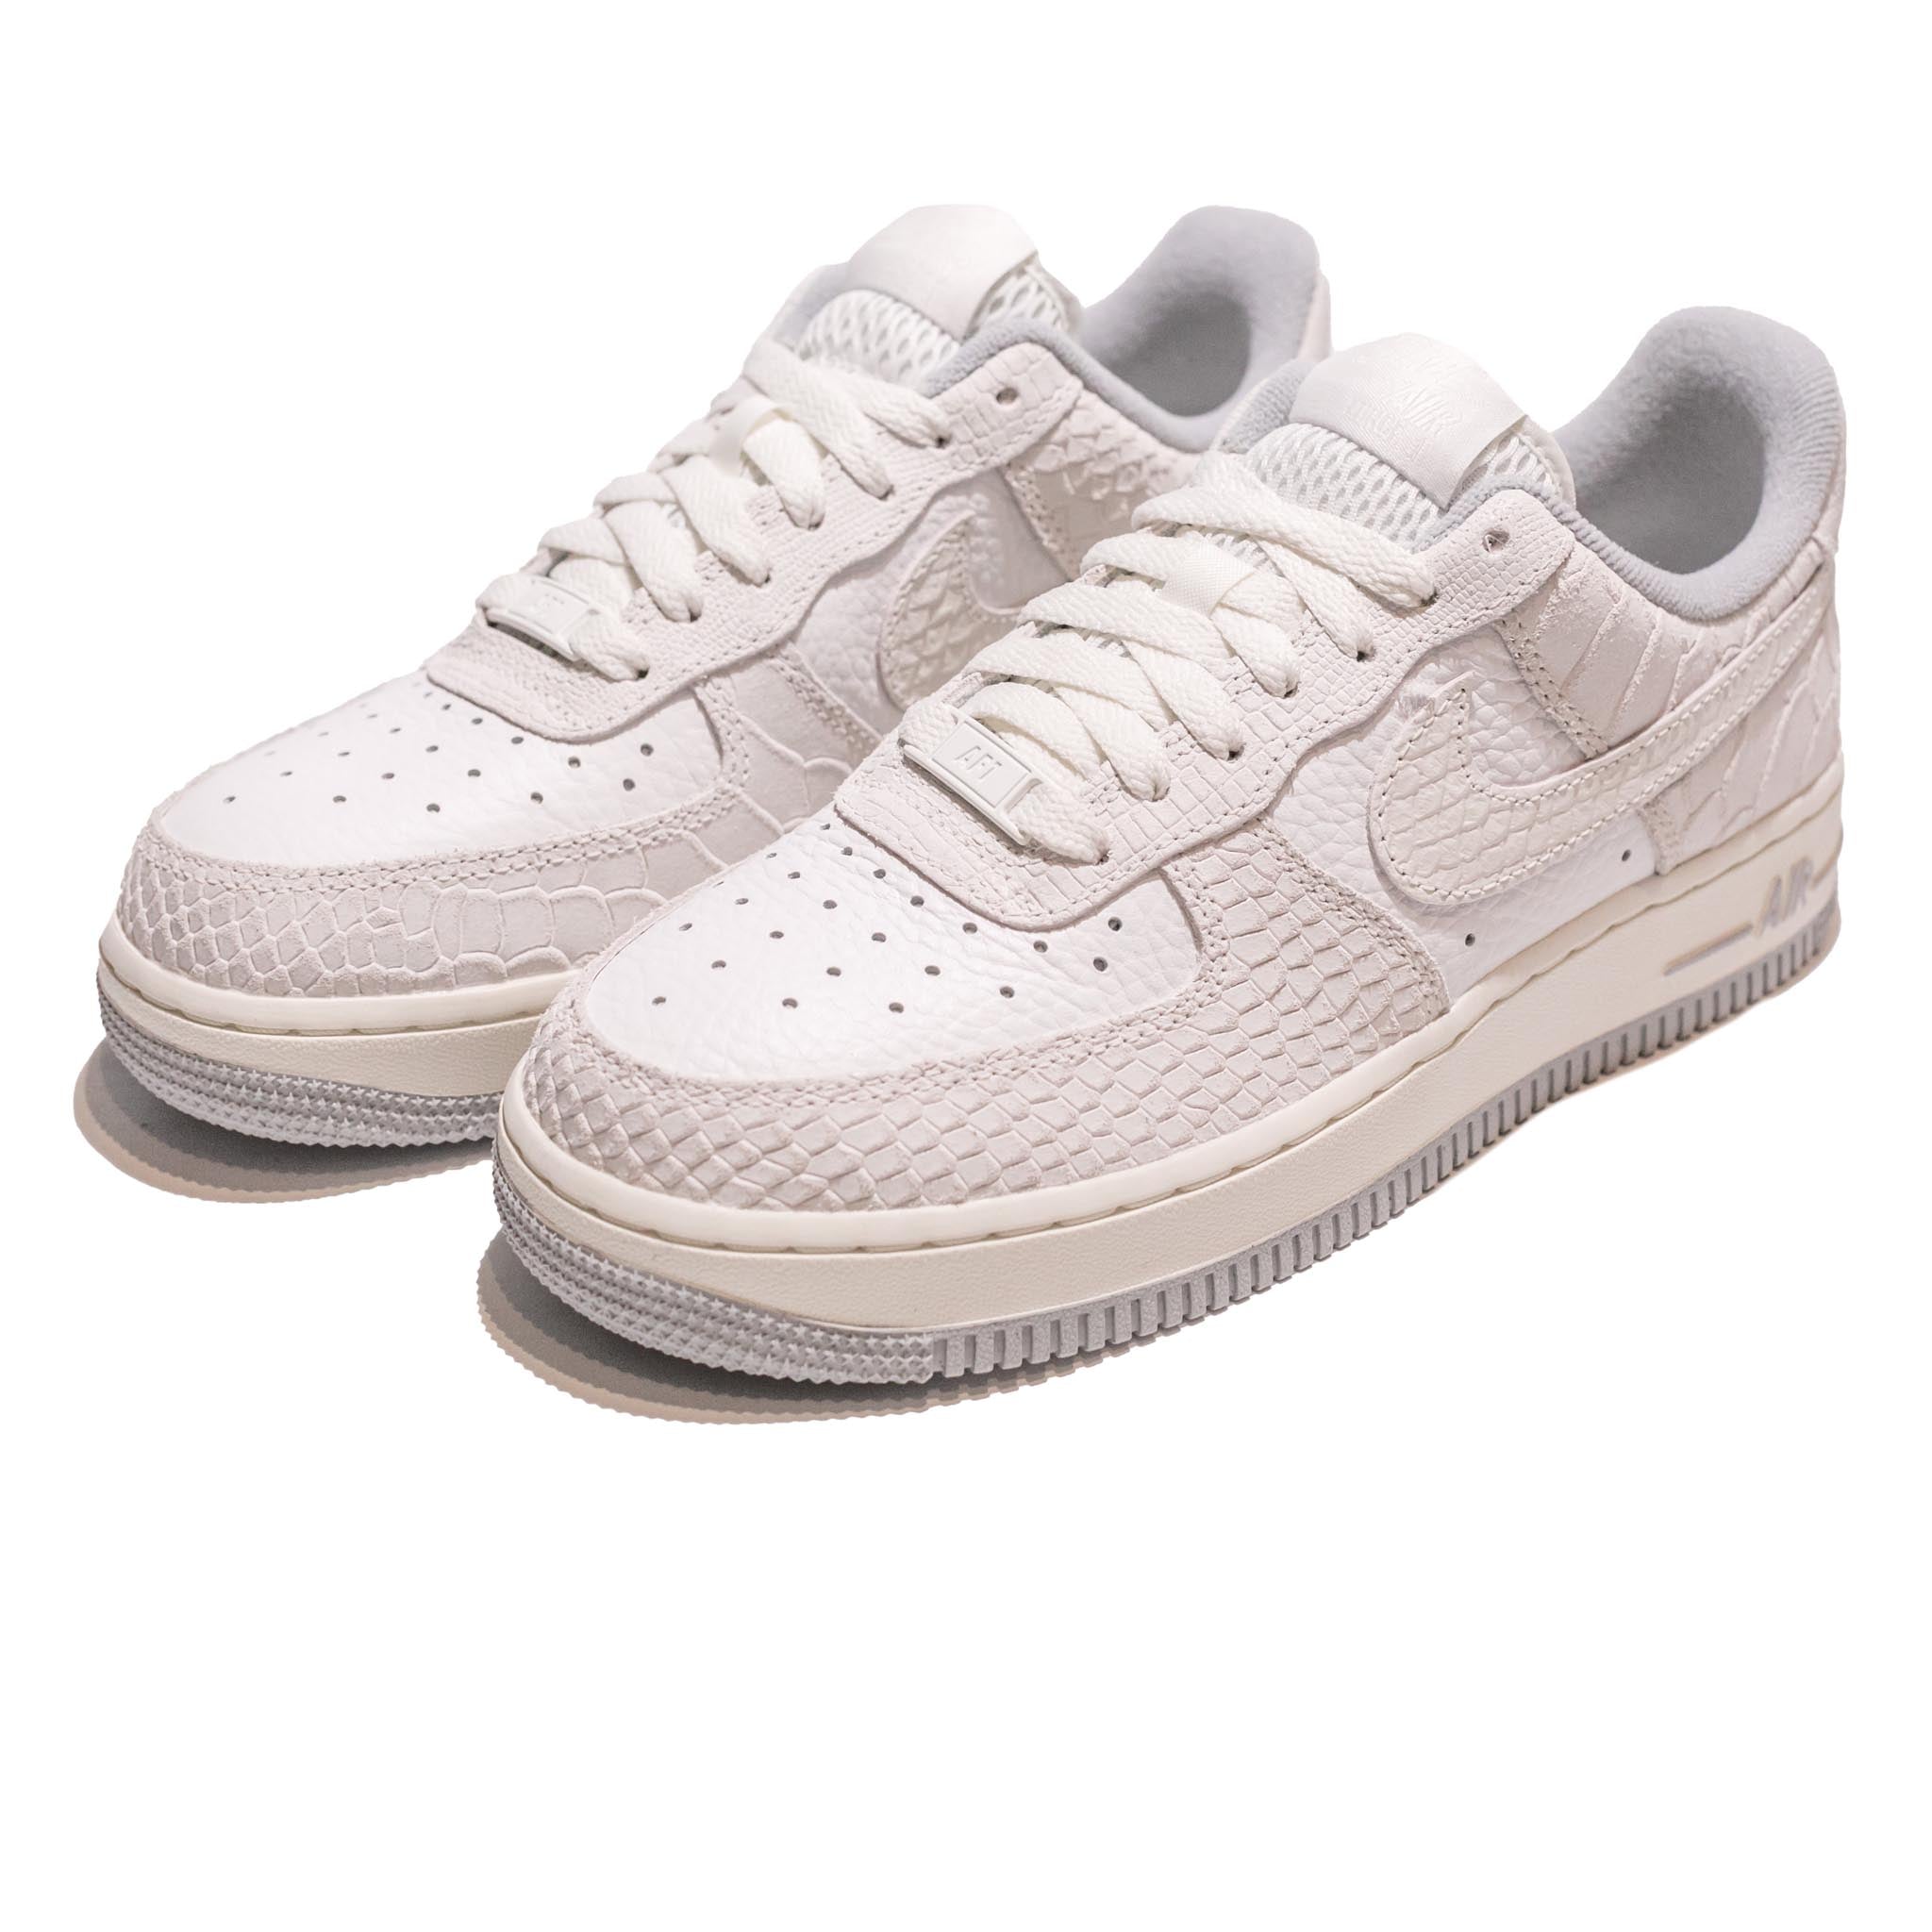 Nike Air Force 1 Low Summit White Wolf Grey DX2678-100